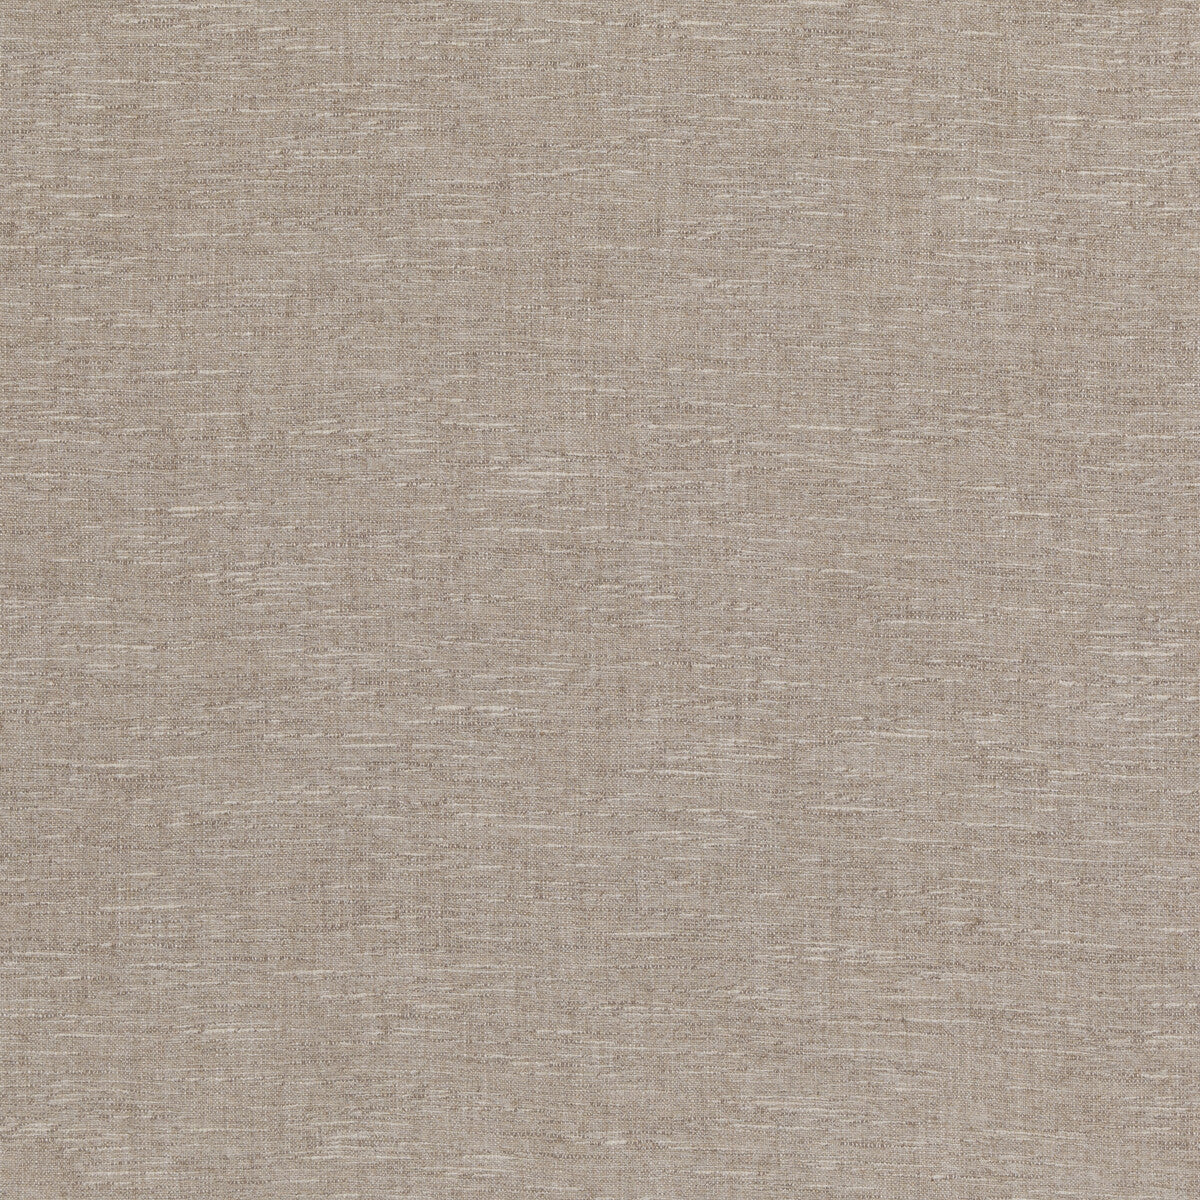 Drumlin fabric in linen color - pattern ED85374.110.0 - by Threads in the Quintessential Textures collection